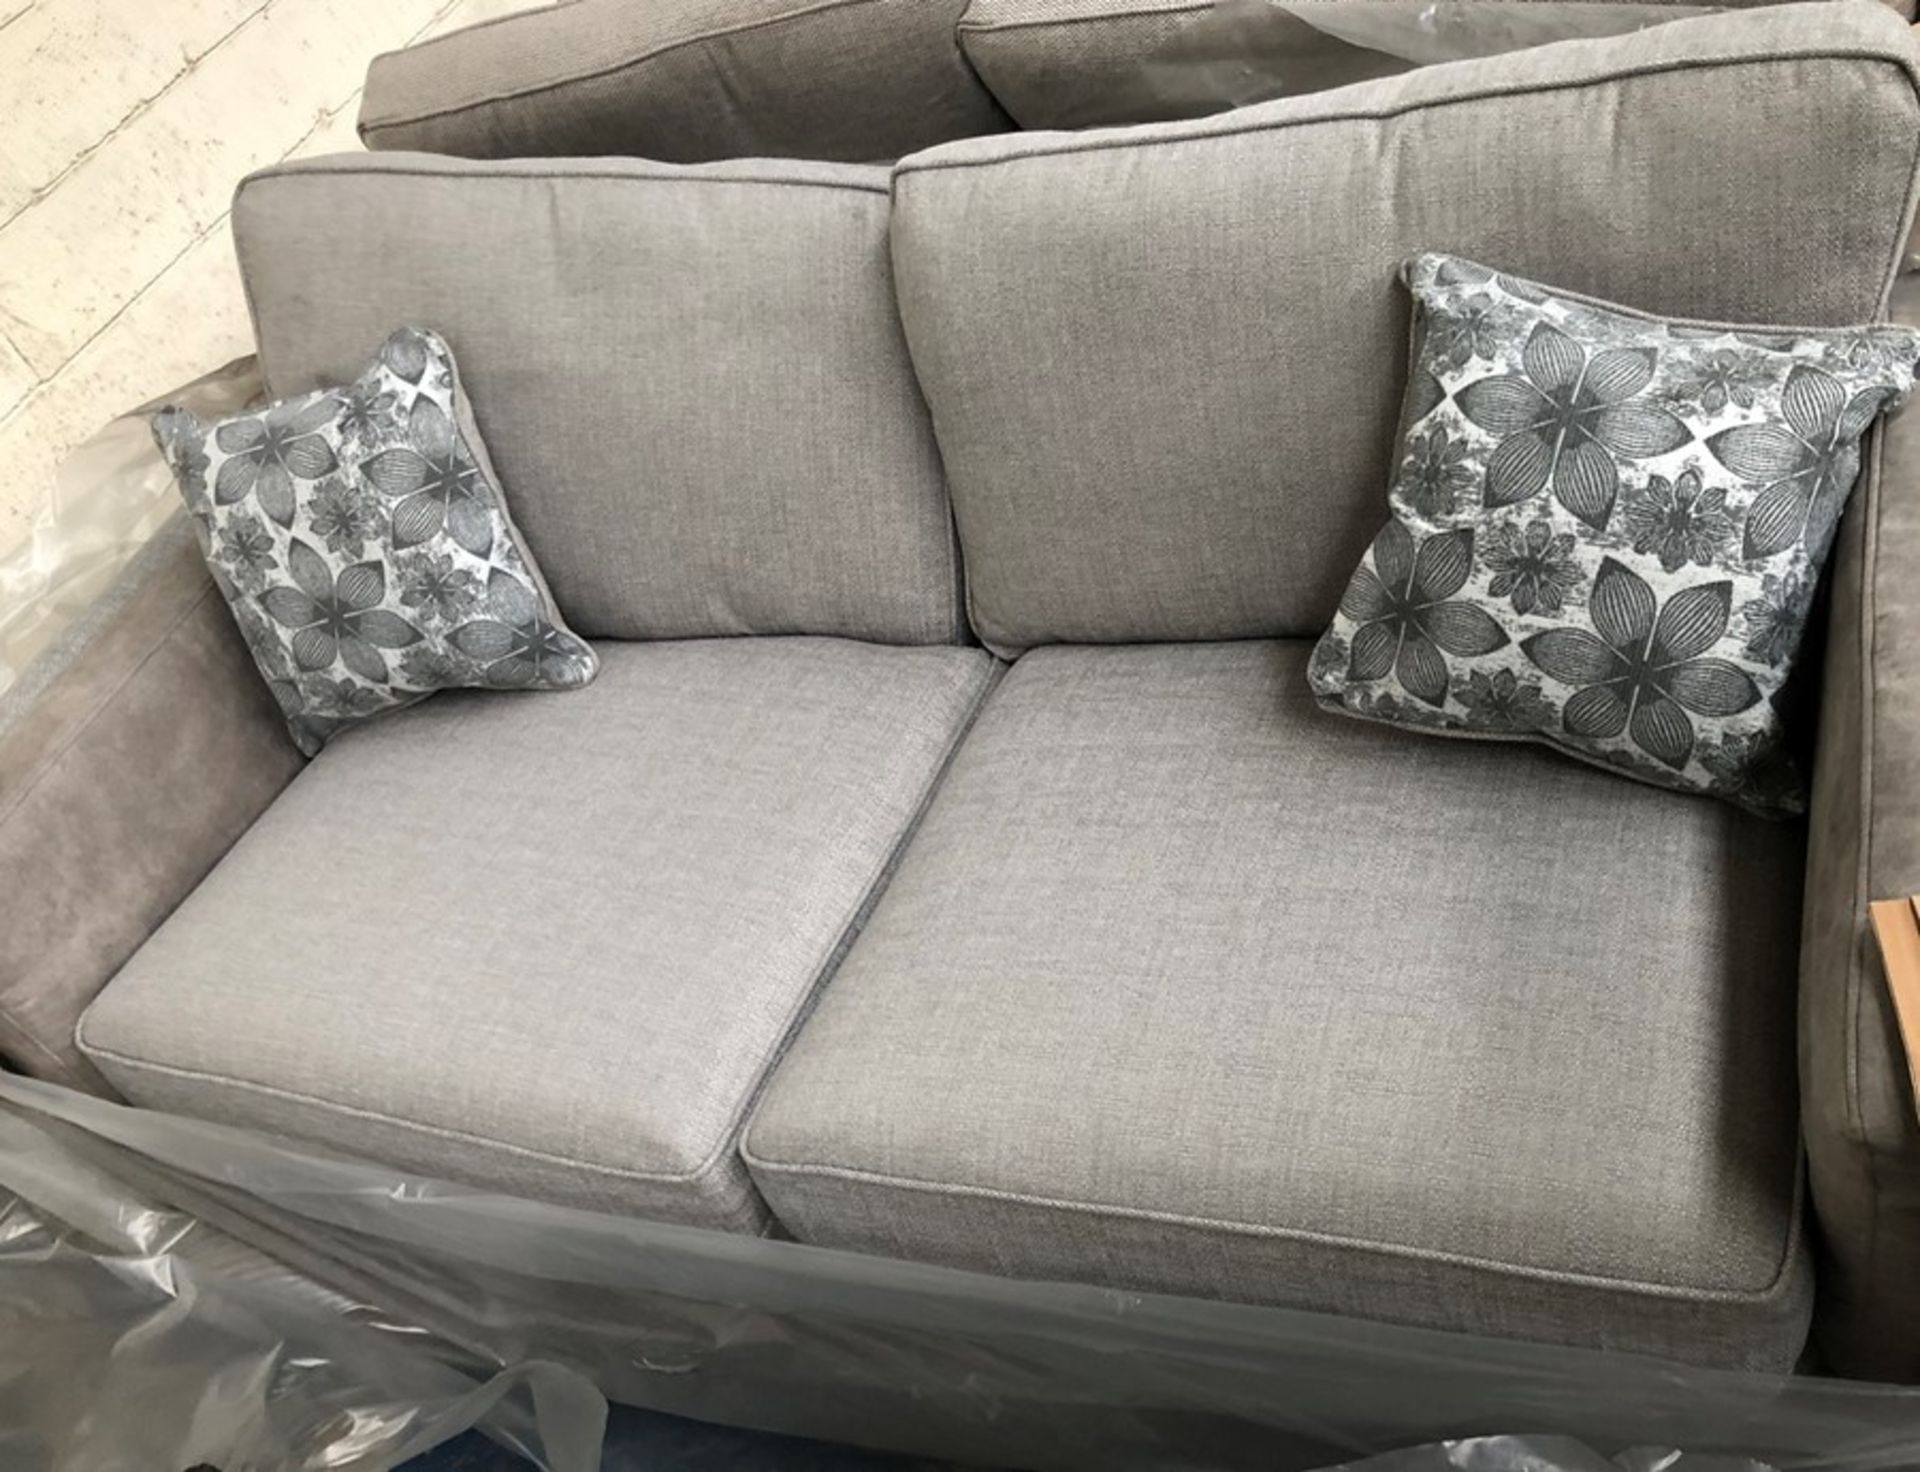 1 BRAND NEW BAGGED FABB SOFAS SEATTLE 3 SEATER SOFA IN LISBON SILVER (VIEWING HIGHLY RECOMMENDED)